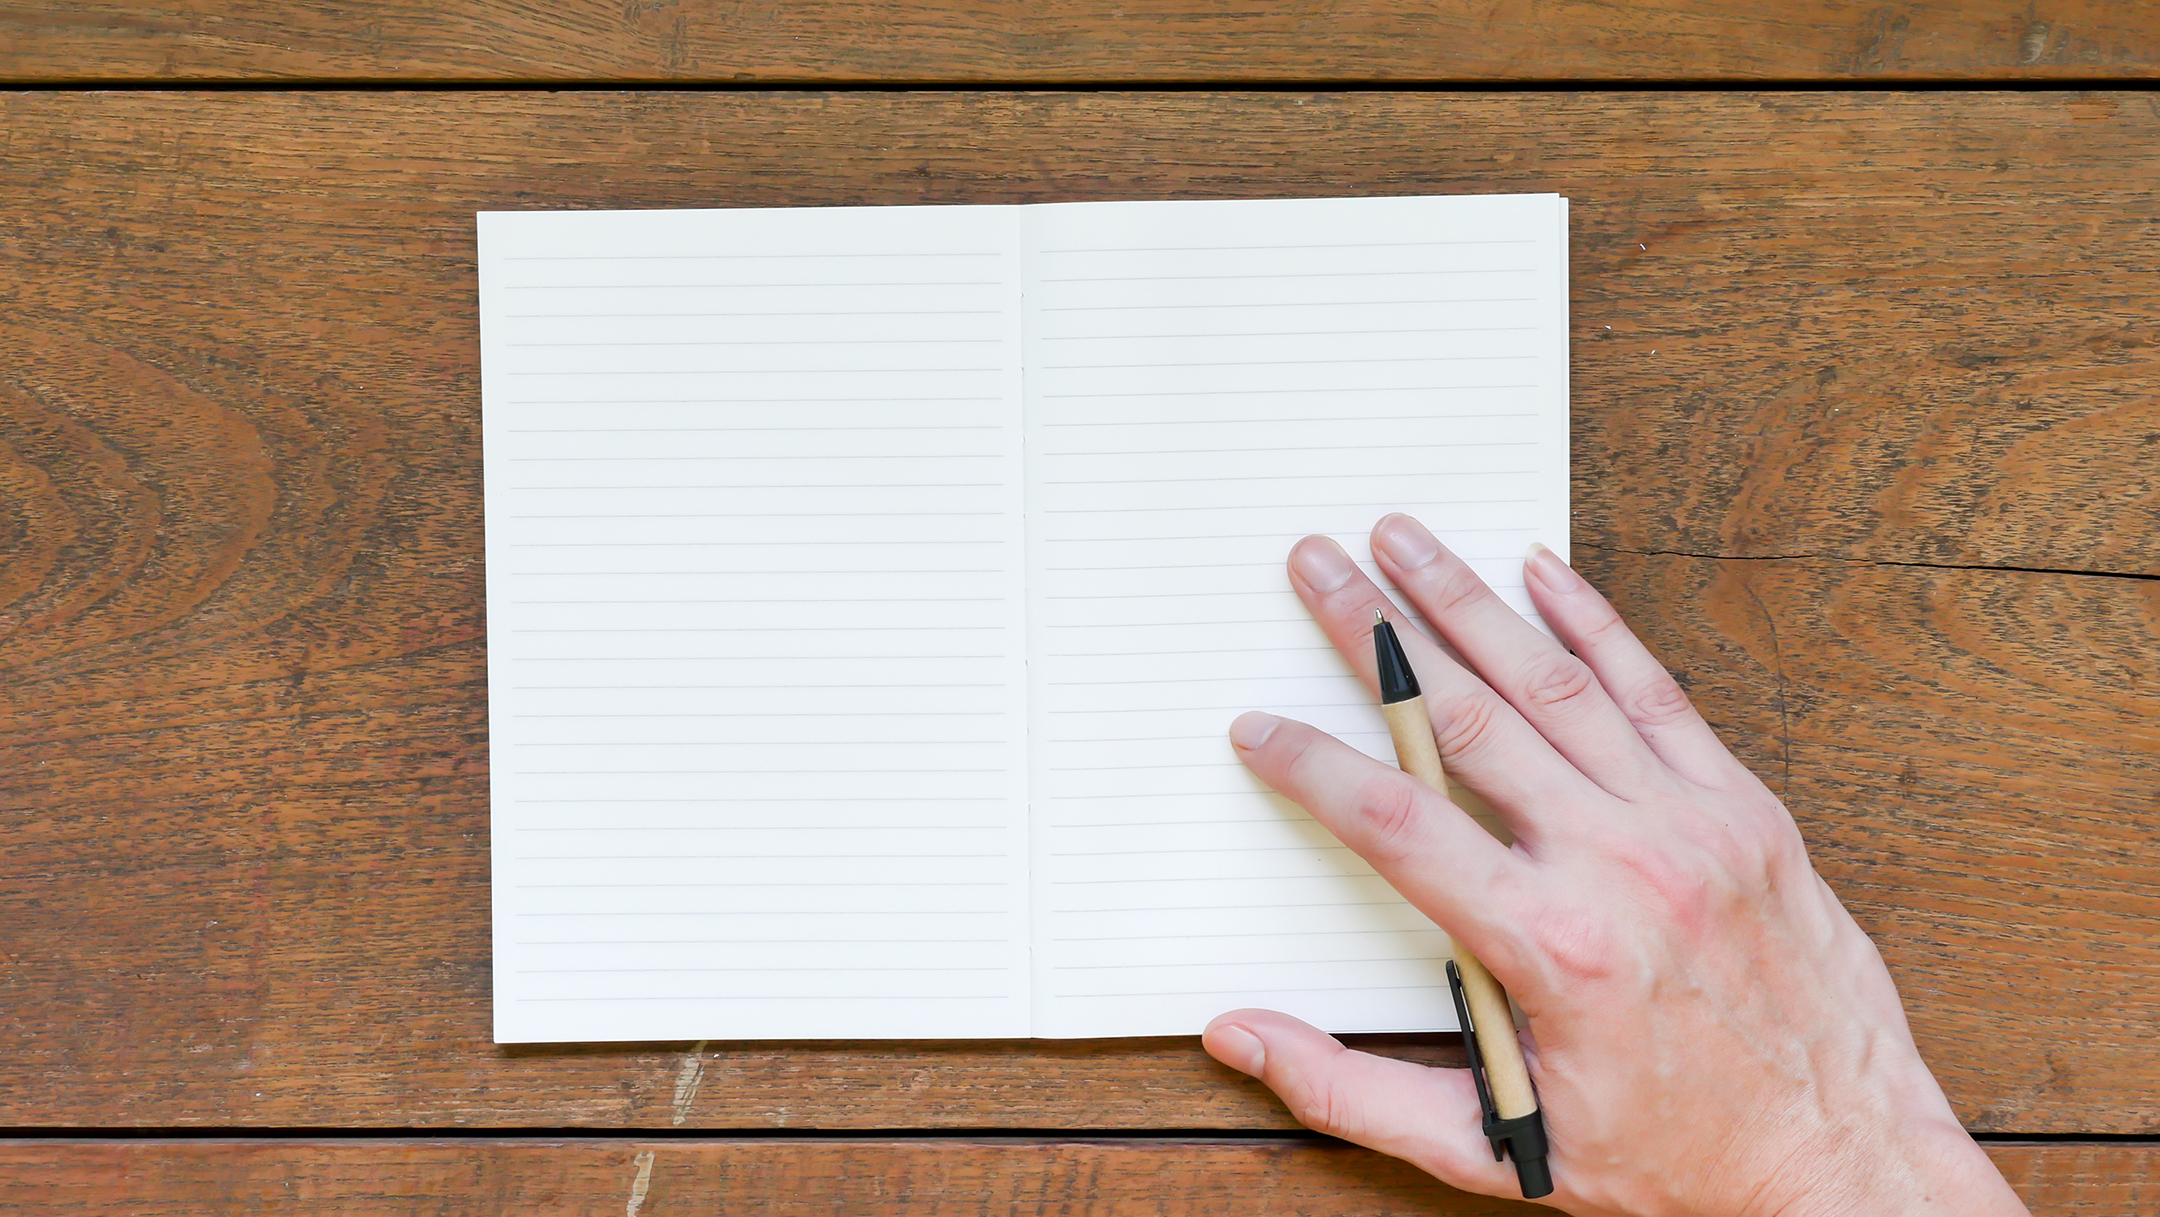 open blank journal on a wooden table, with a hand holding a pencil on the right side of the journal